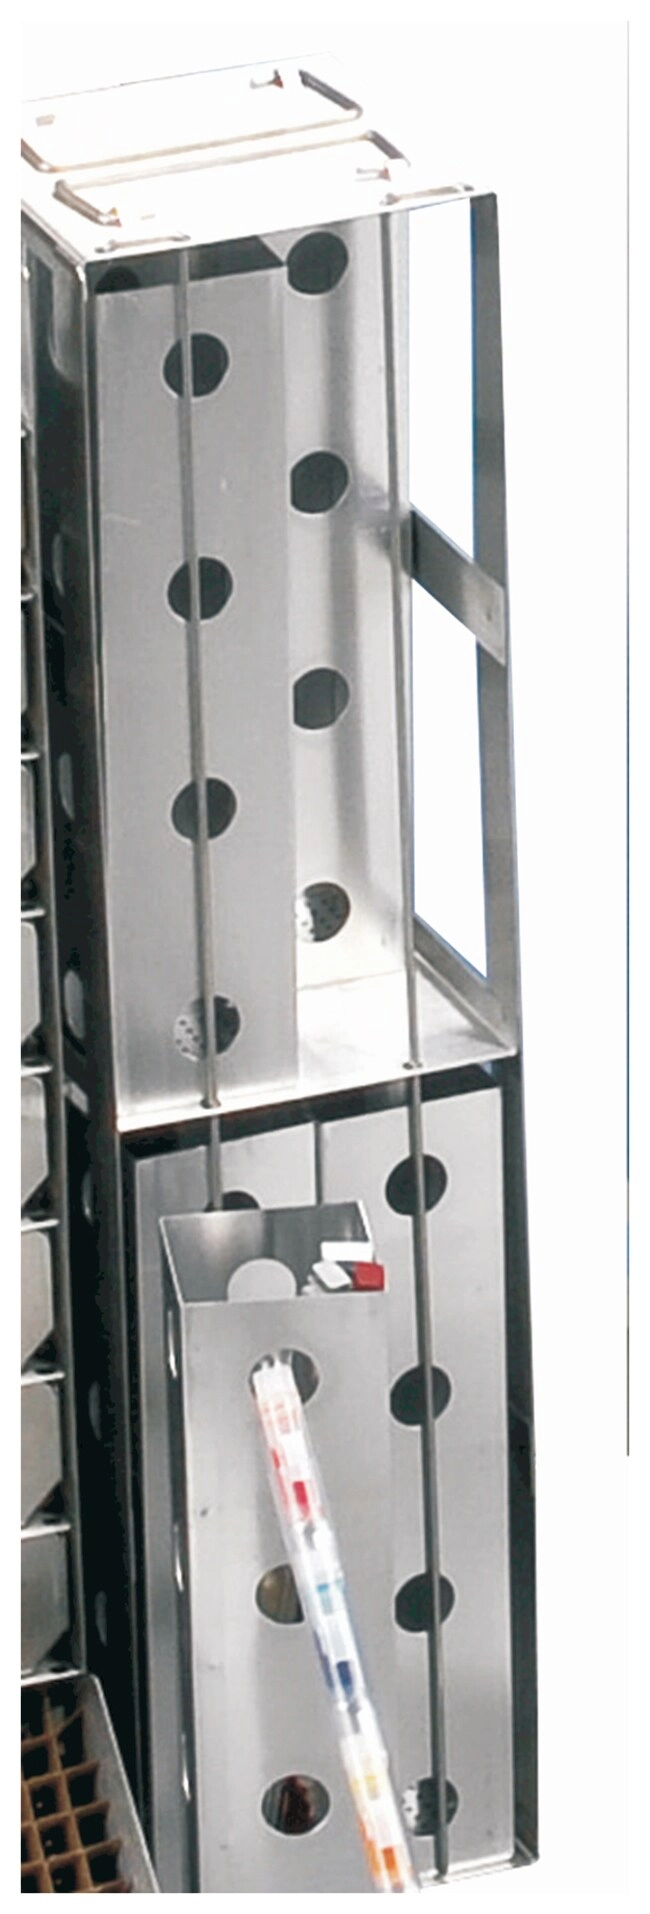 CryoPlus Canisters, Frames and Dividers